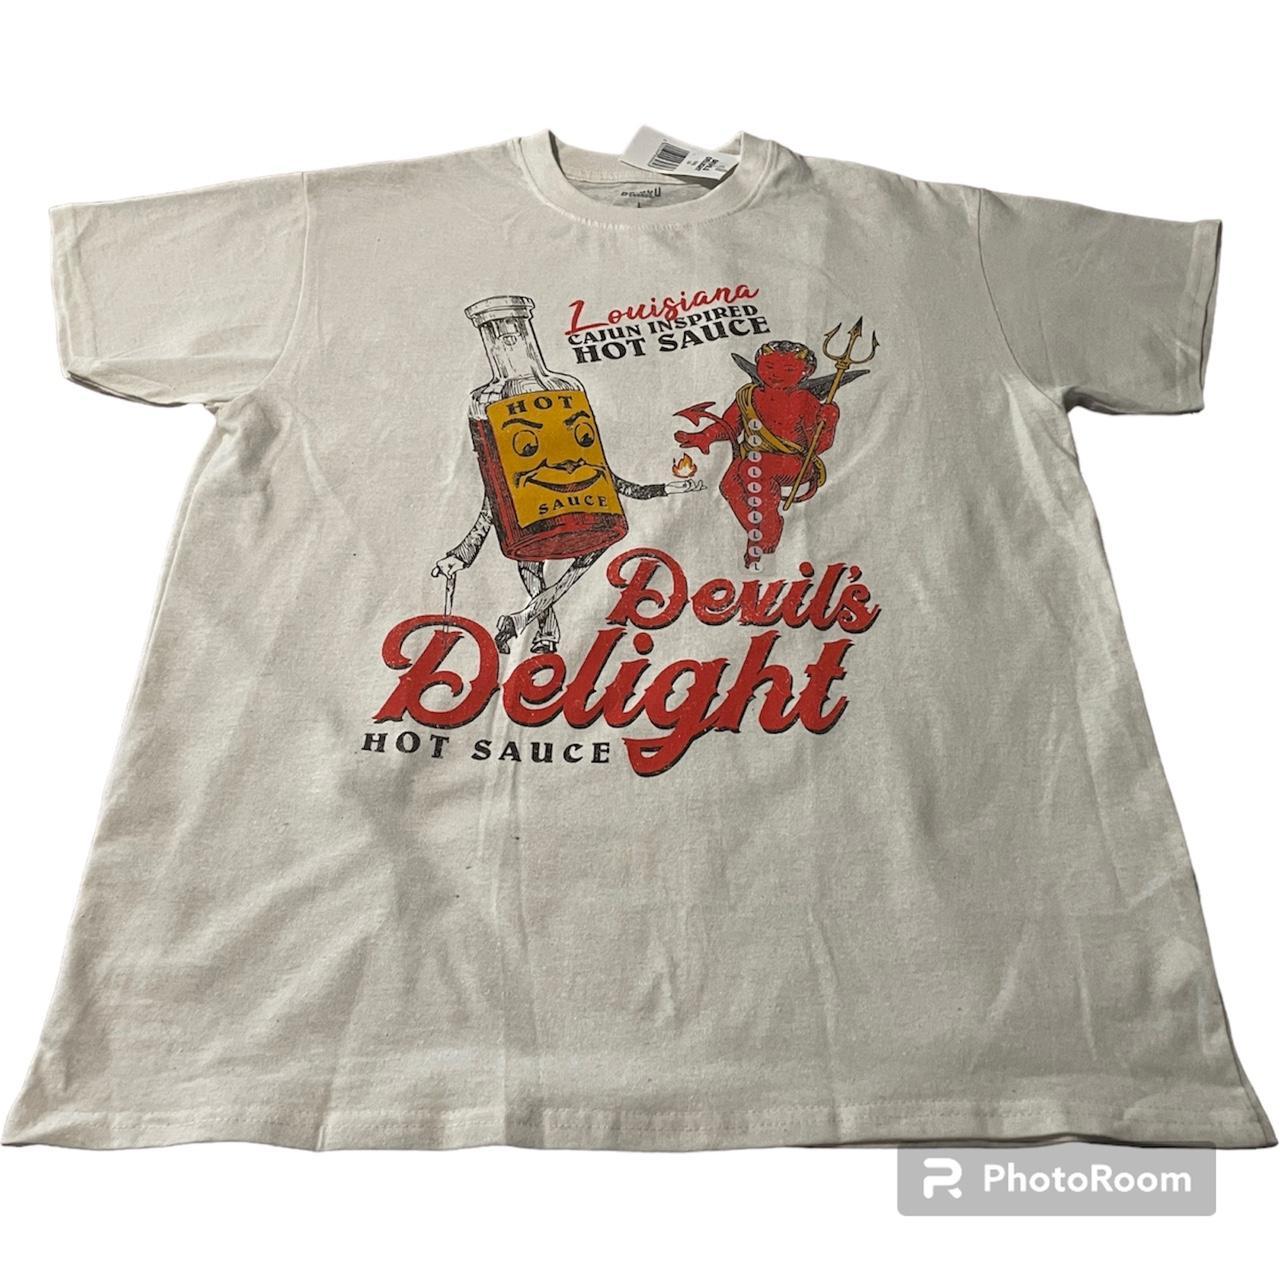 NEW WITH TAGS, Marketing Tee, “Devil’s Delight” Hot...